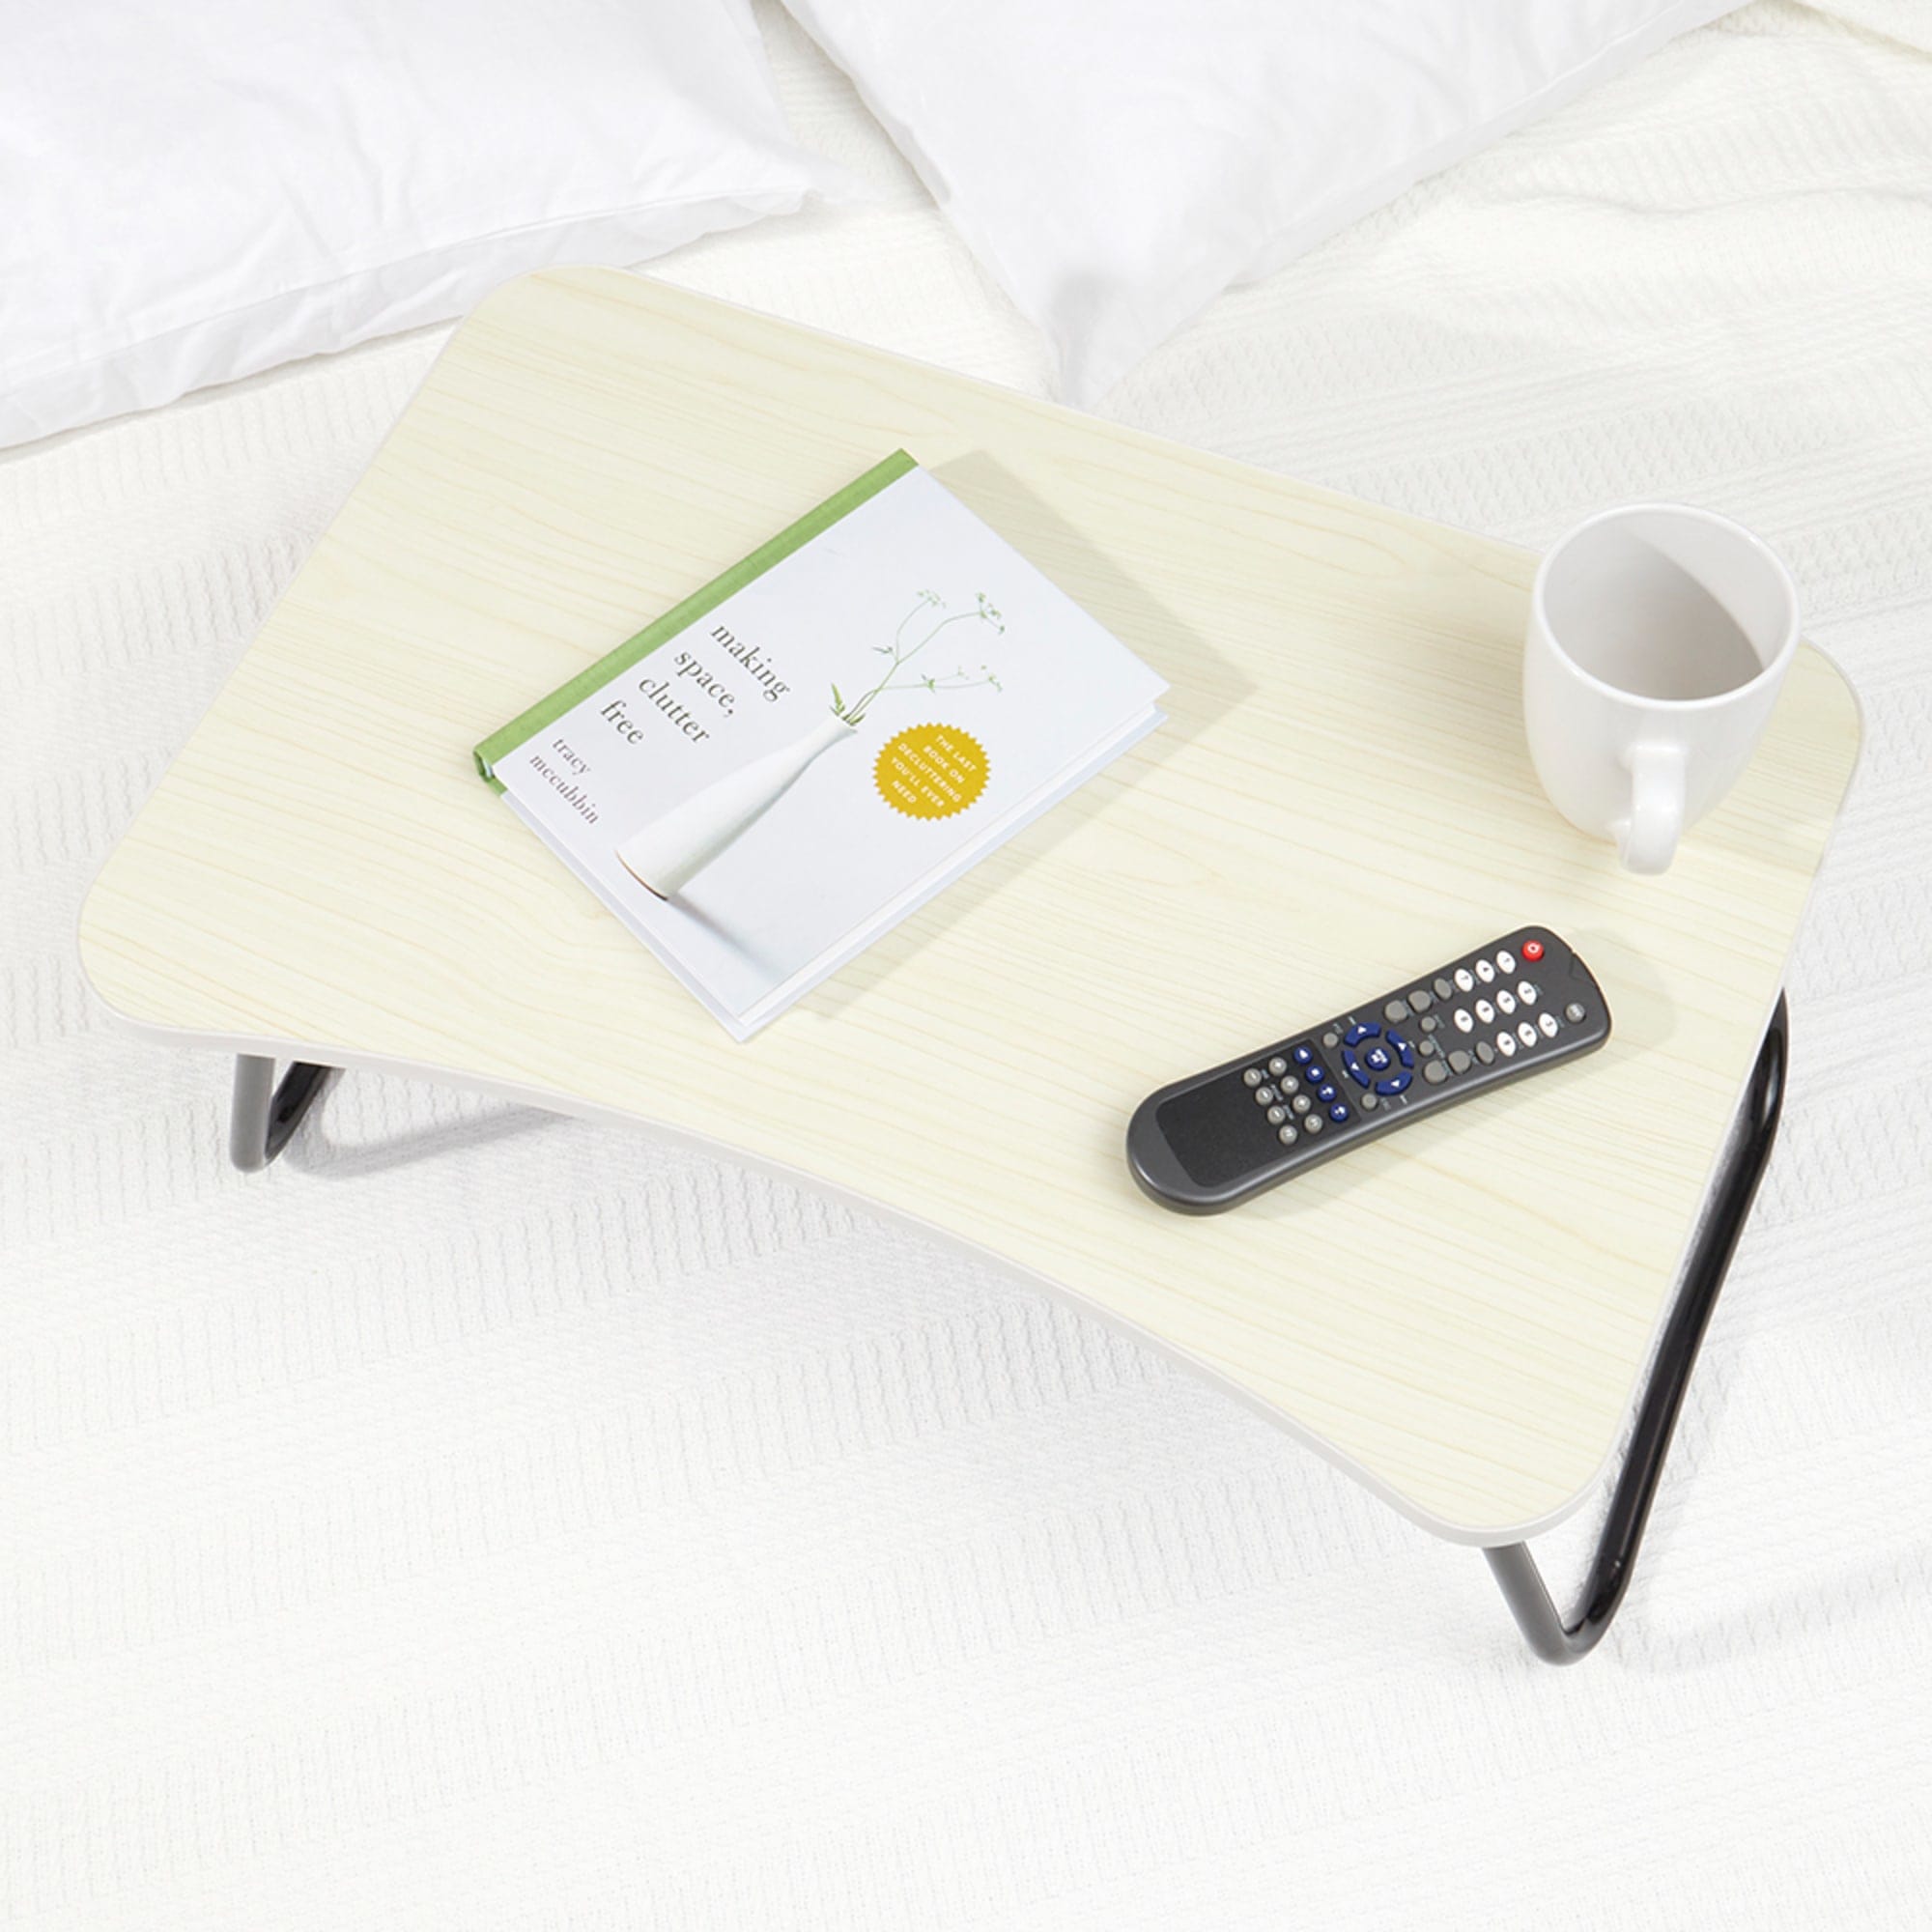 Home Basics Contoured MDF Bed Tray $15 EACH, CASE PACK OF 8